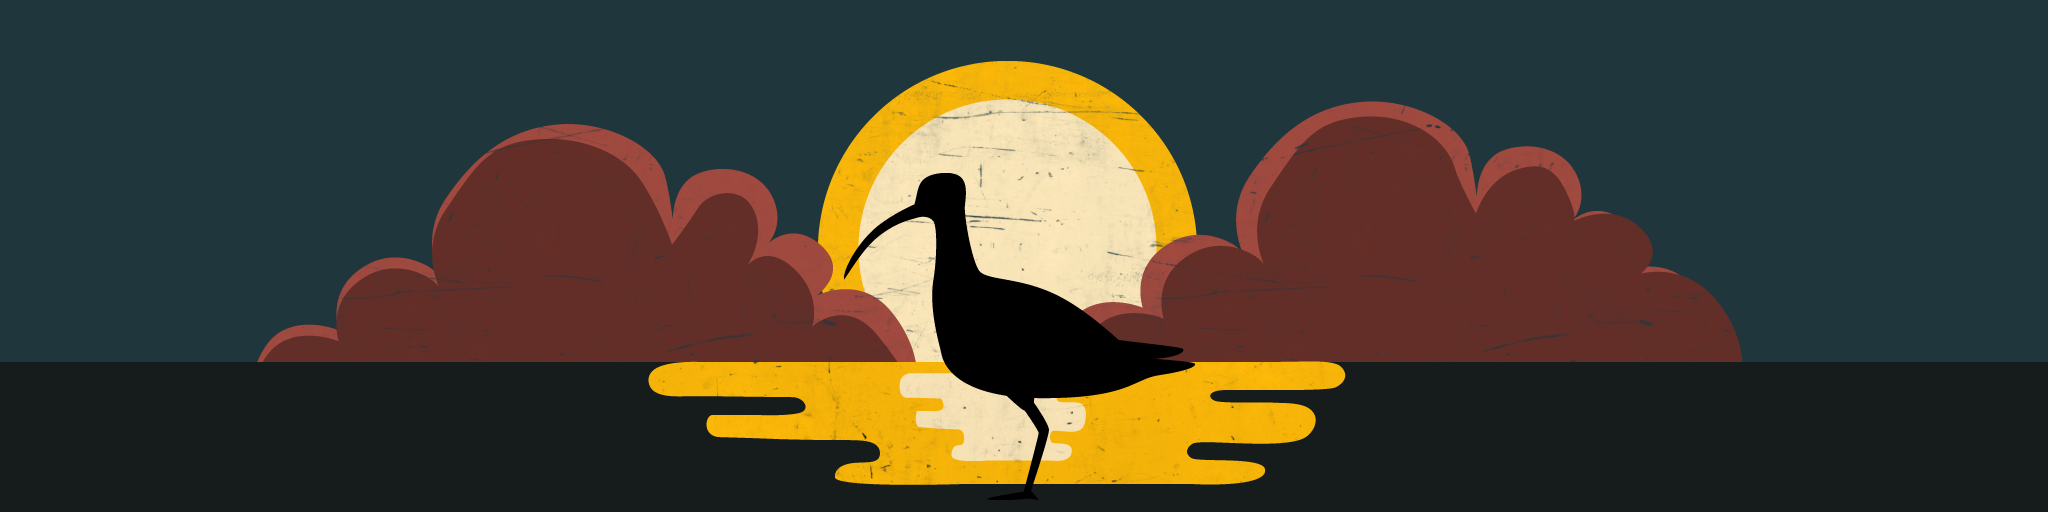 Banner image of a euroasian curlew